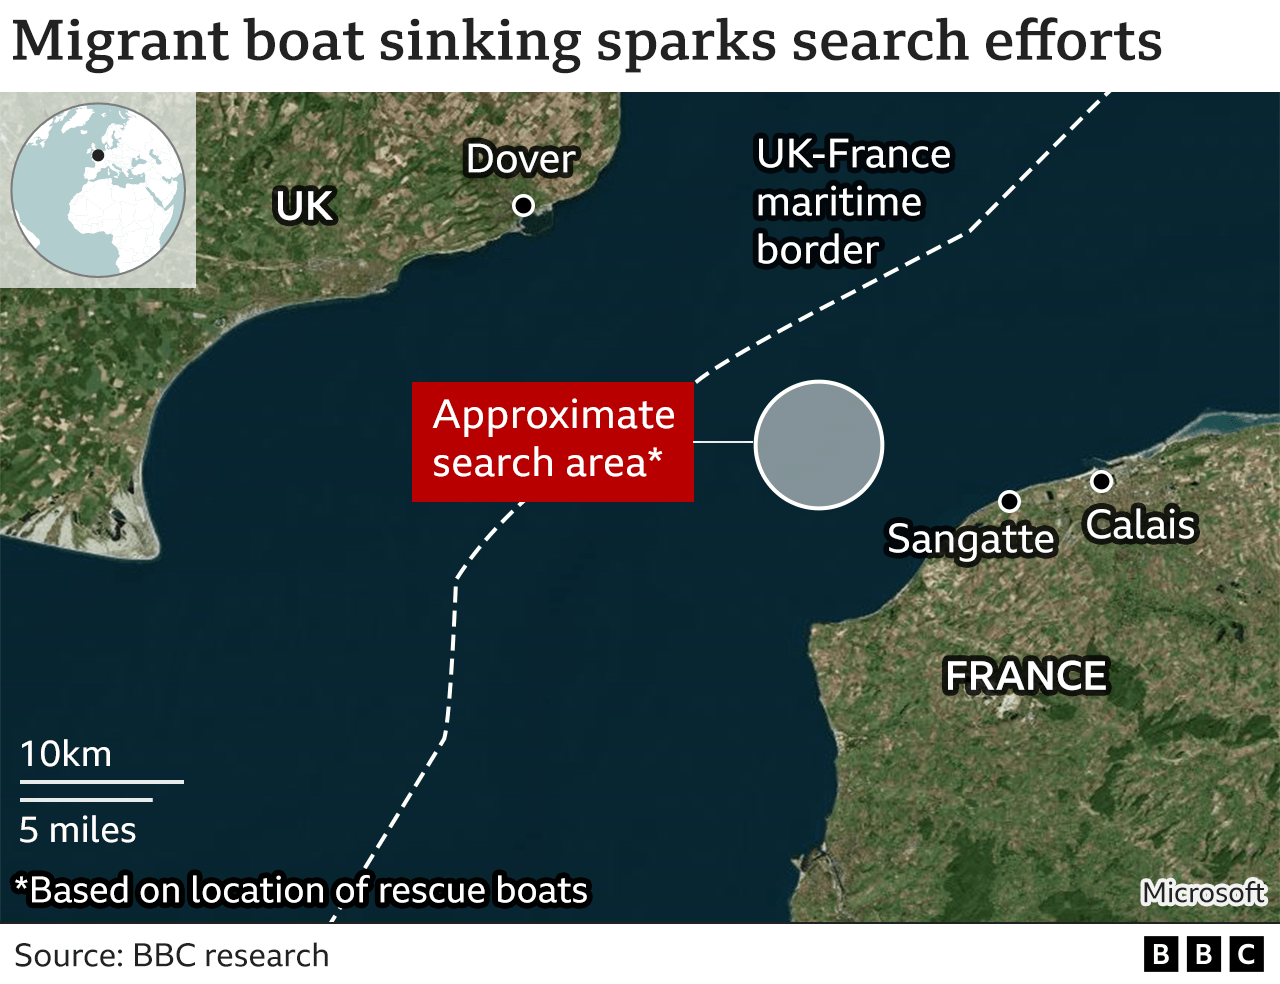 A map showing the area of the search for the migrant boat in comparison with French and English coastlines